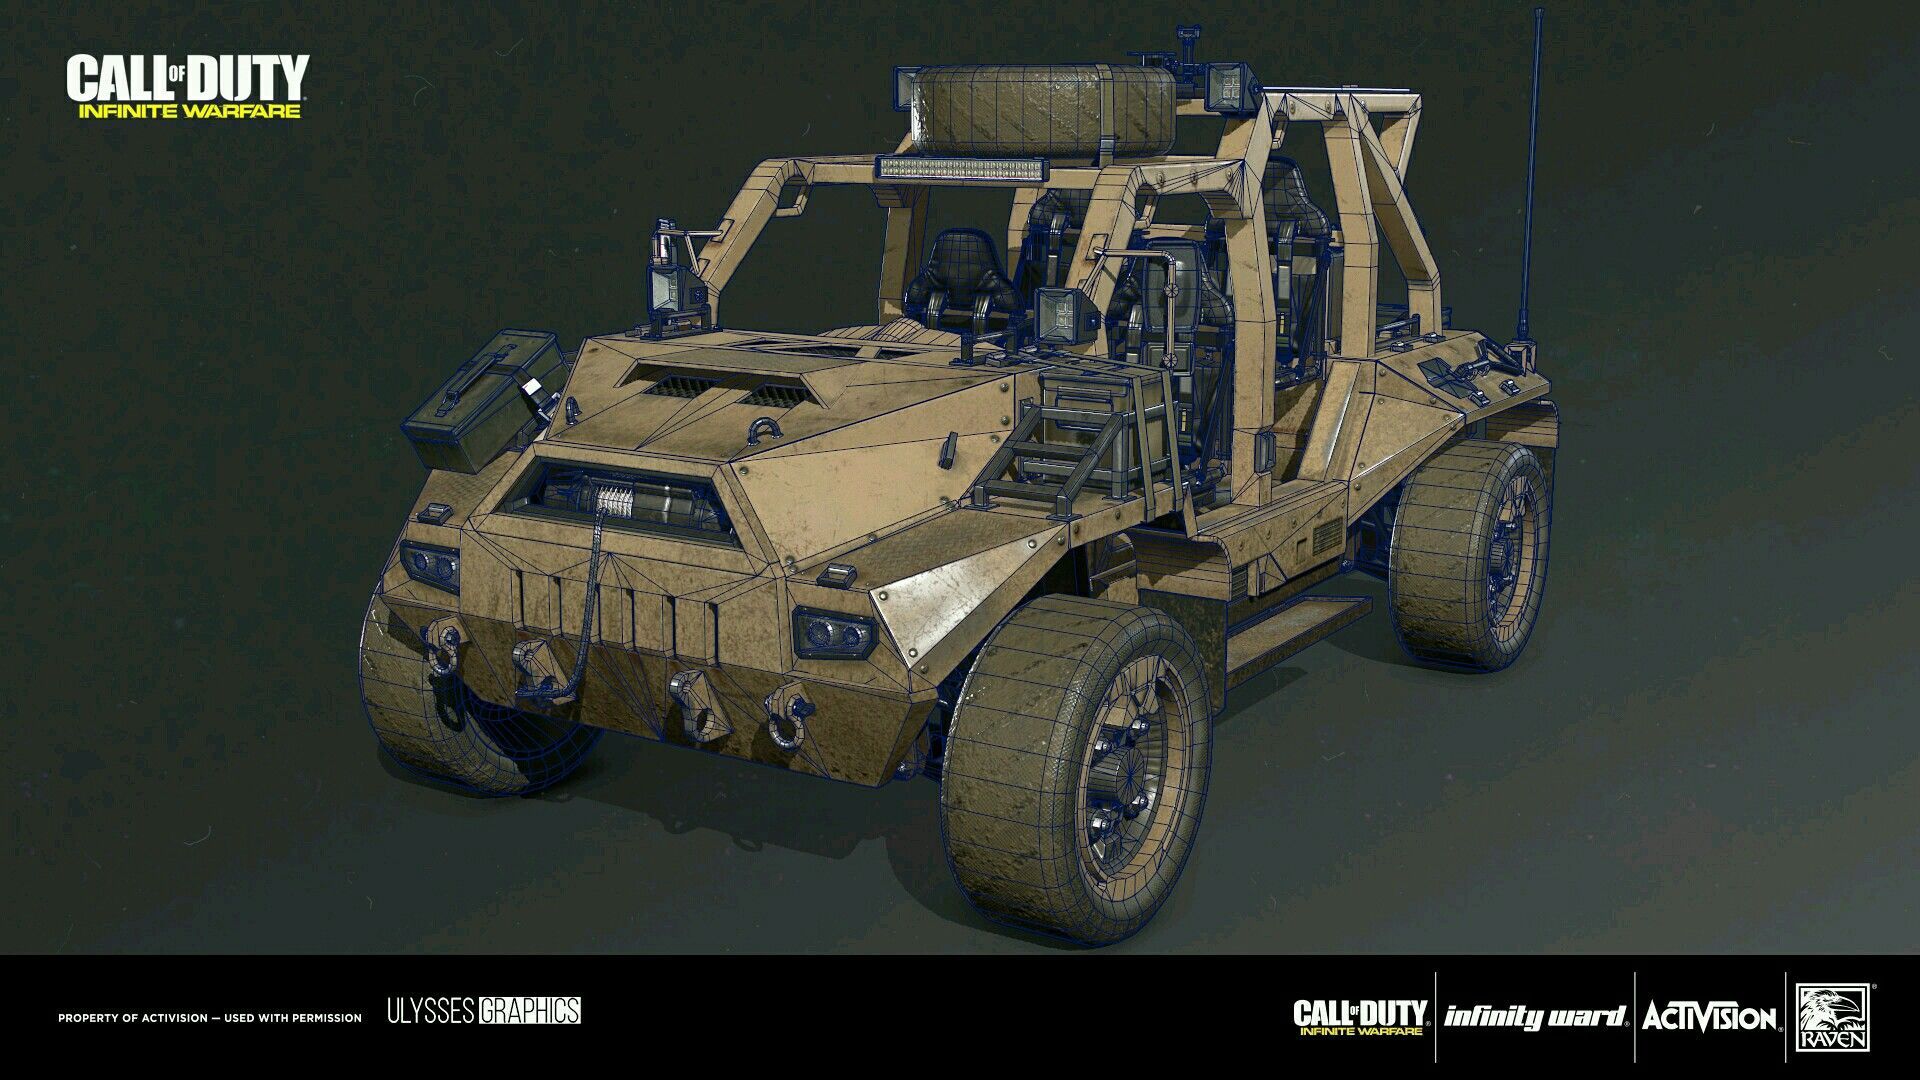 Call of duty. Military vehicles, Military, Call of duty